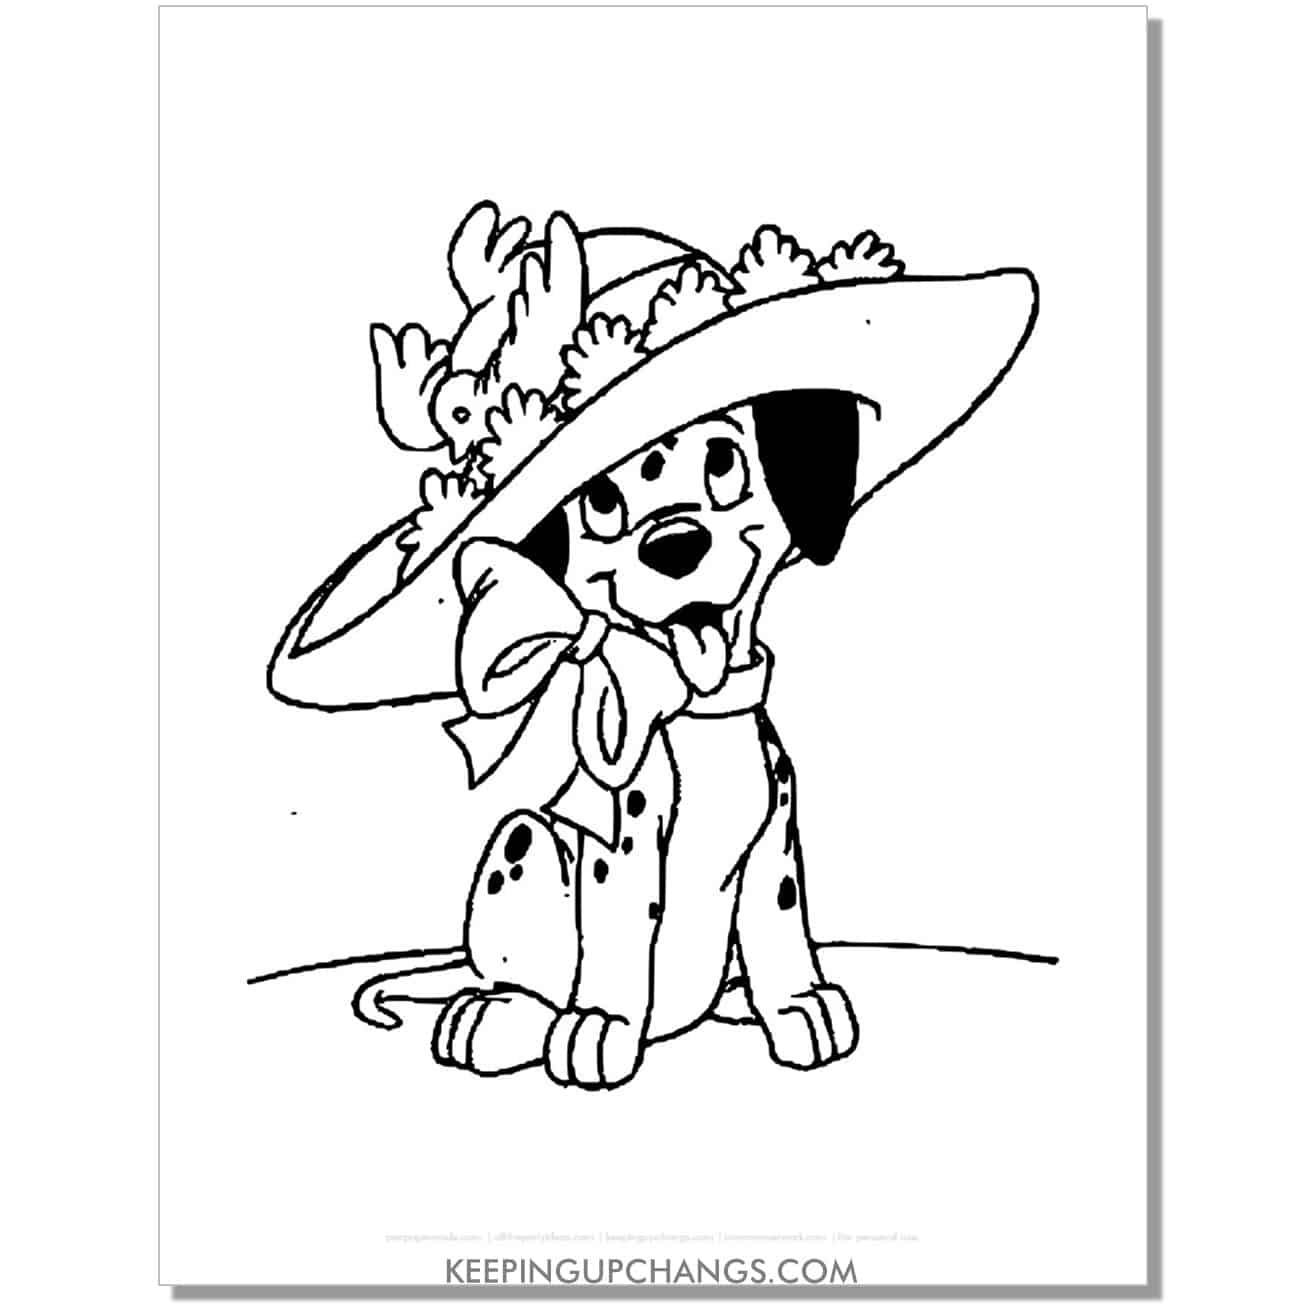 free lucky wearing a sunhat 101 dalmations coloring page, sheet.